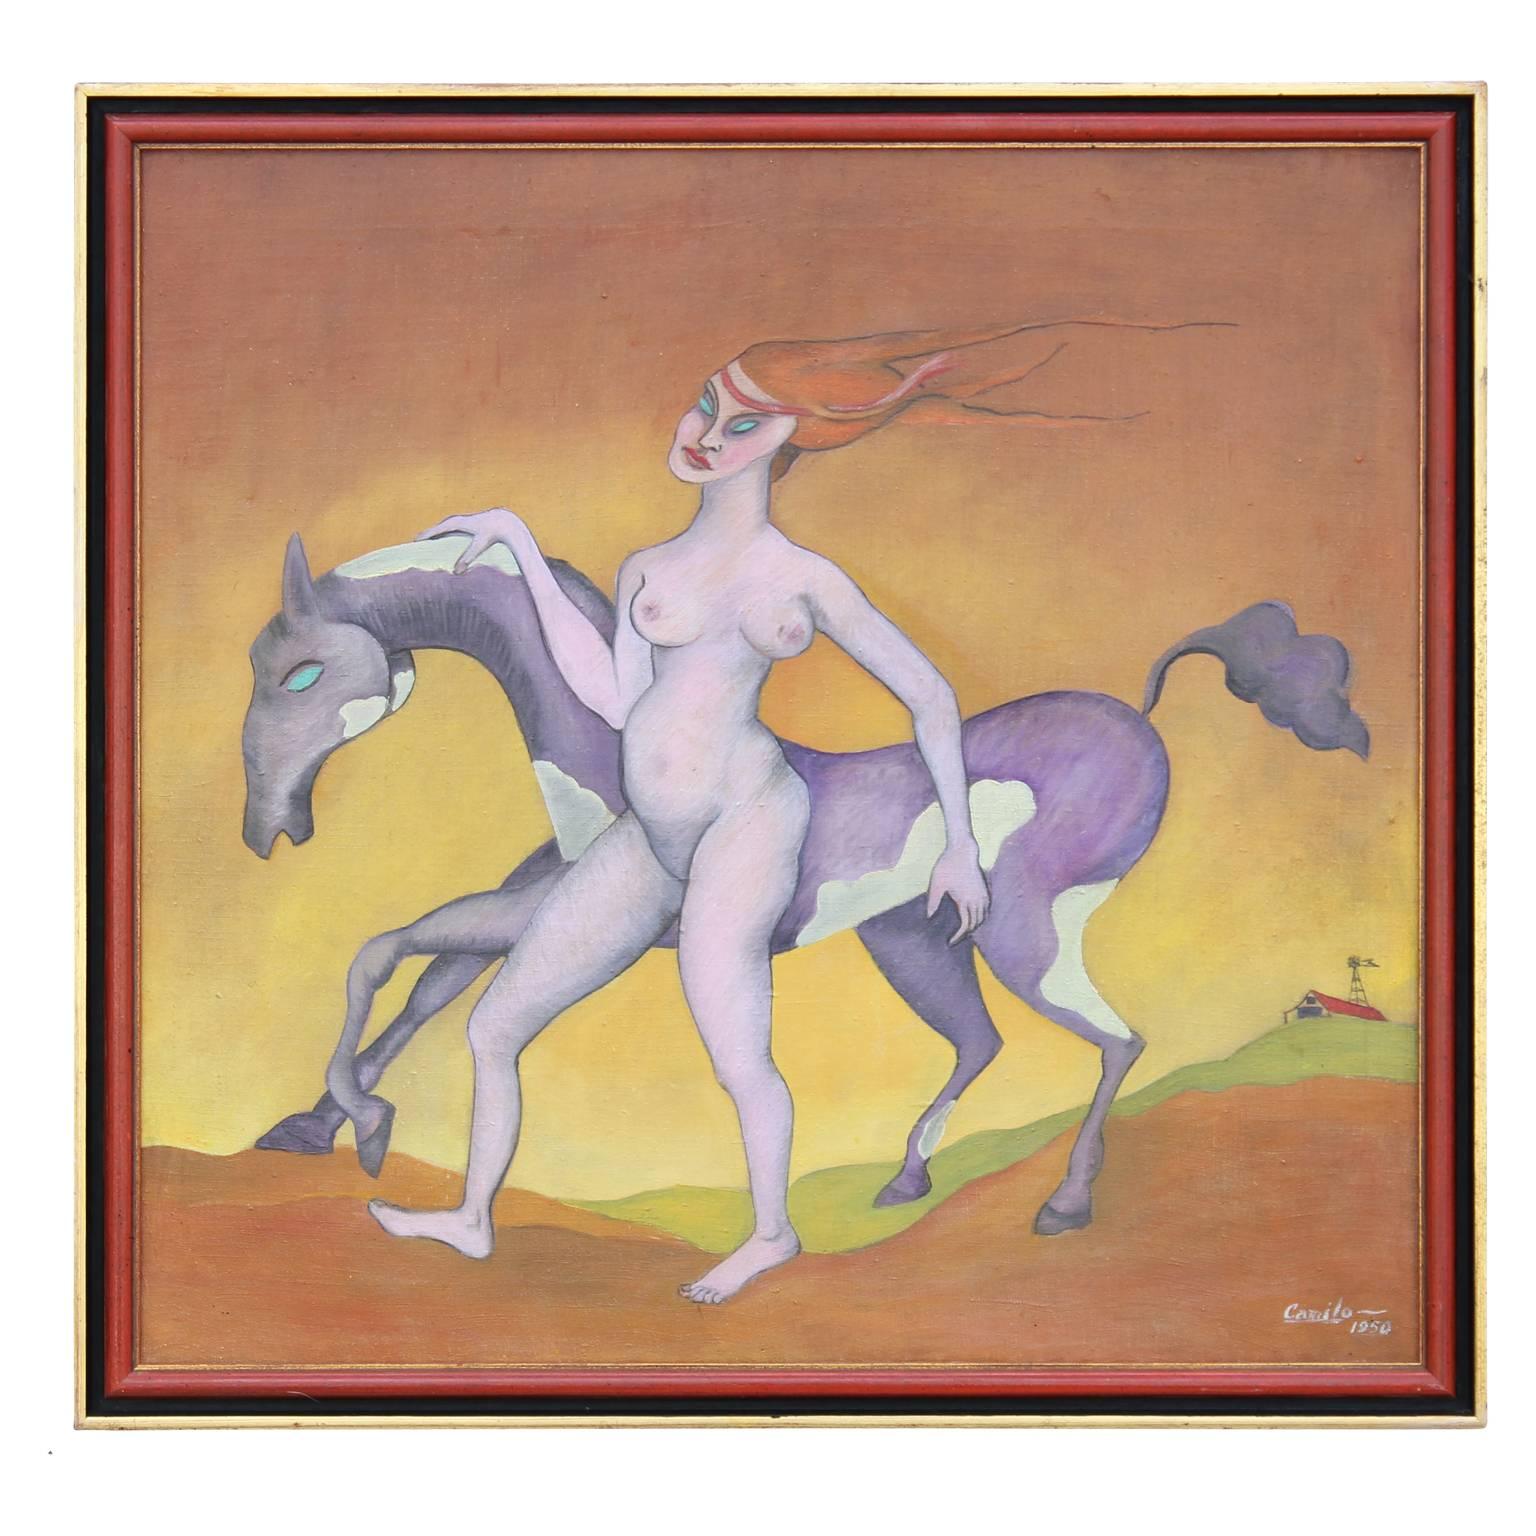 Camilo Nude Painting – Surrealist Painting of a Nude Woman and Horse